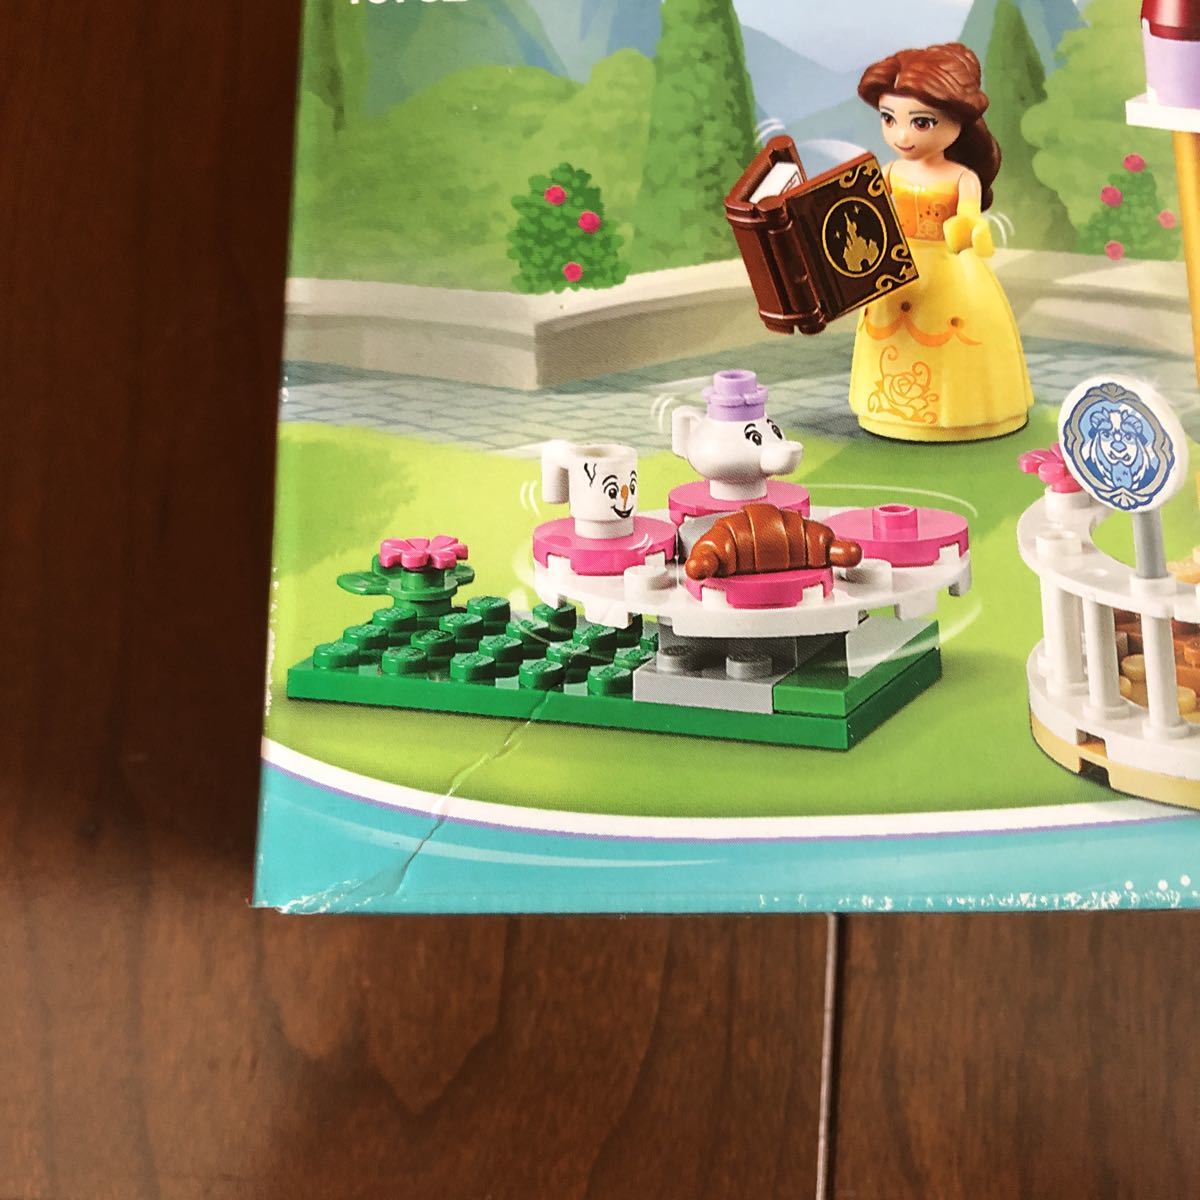  Lego (LEGO) Junior bell. -stroke - Lee time 10762 LEGO Juniors Belle\'s Story Time 10762 Beauty and the Beast Disney Princess new goods 